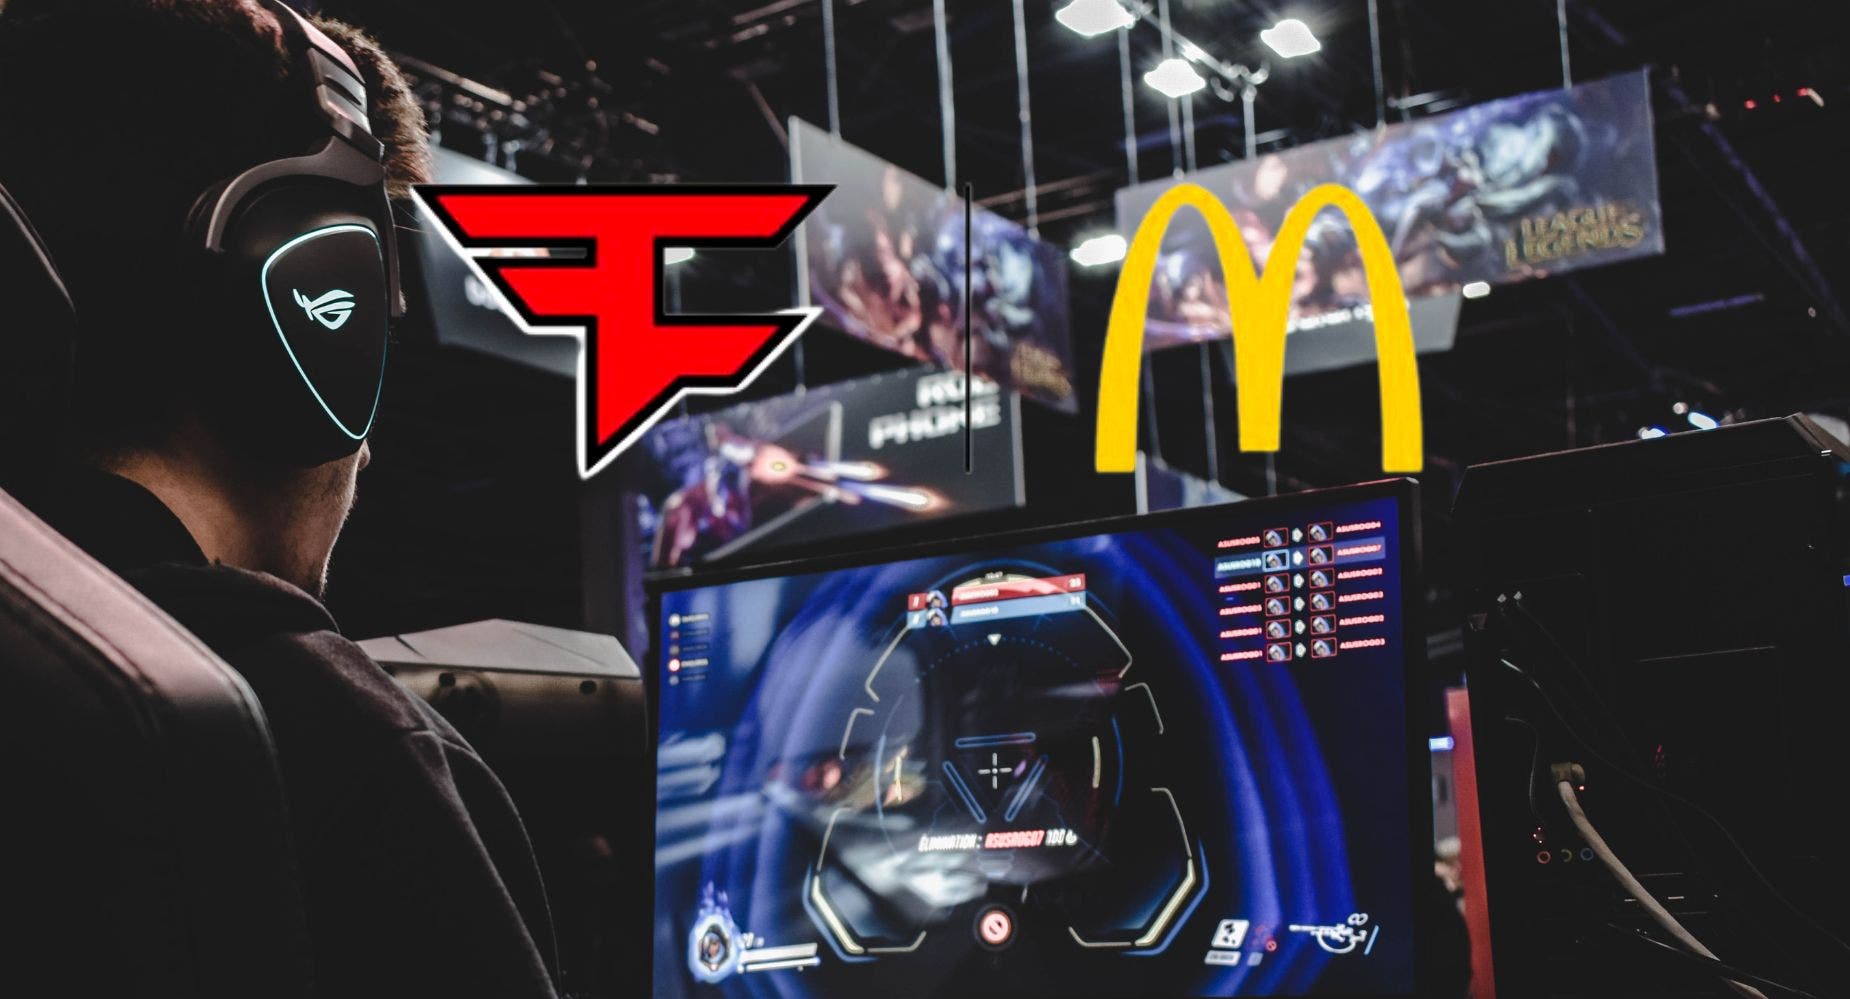 FaZe Holdings And McDonald's Stock Owners Could Say 'I'm Lovin' It' To Renewed Partnership